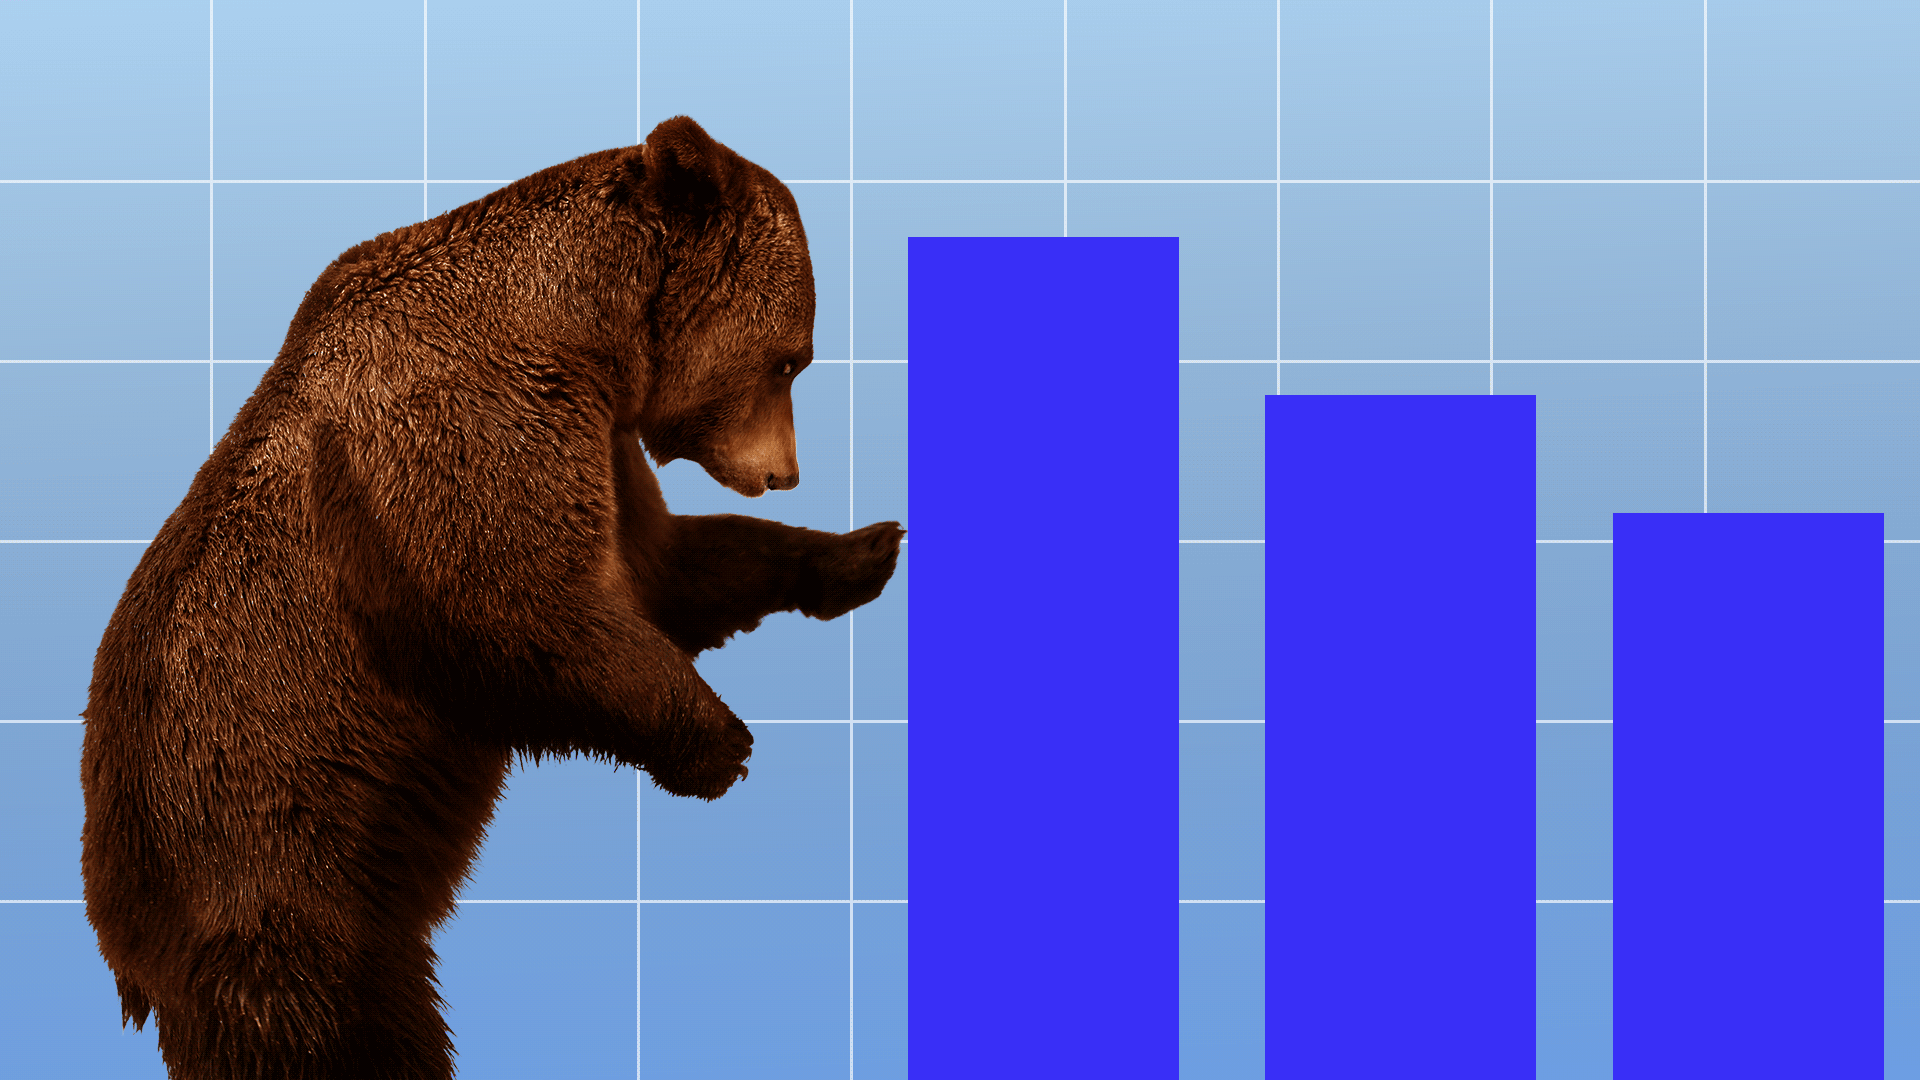 Animated gif of a bear pushing over a bar chart